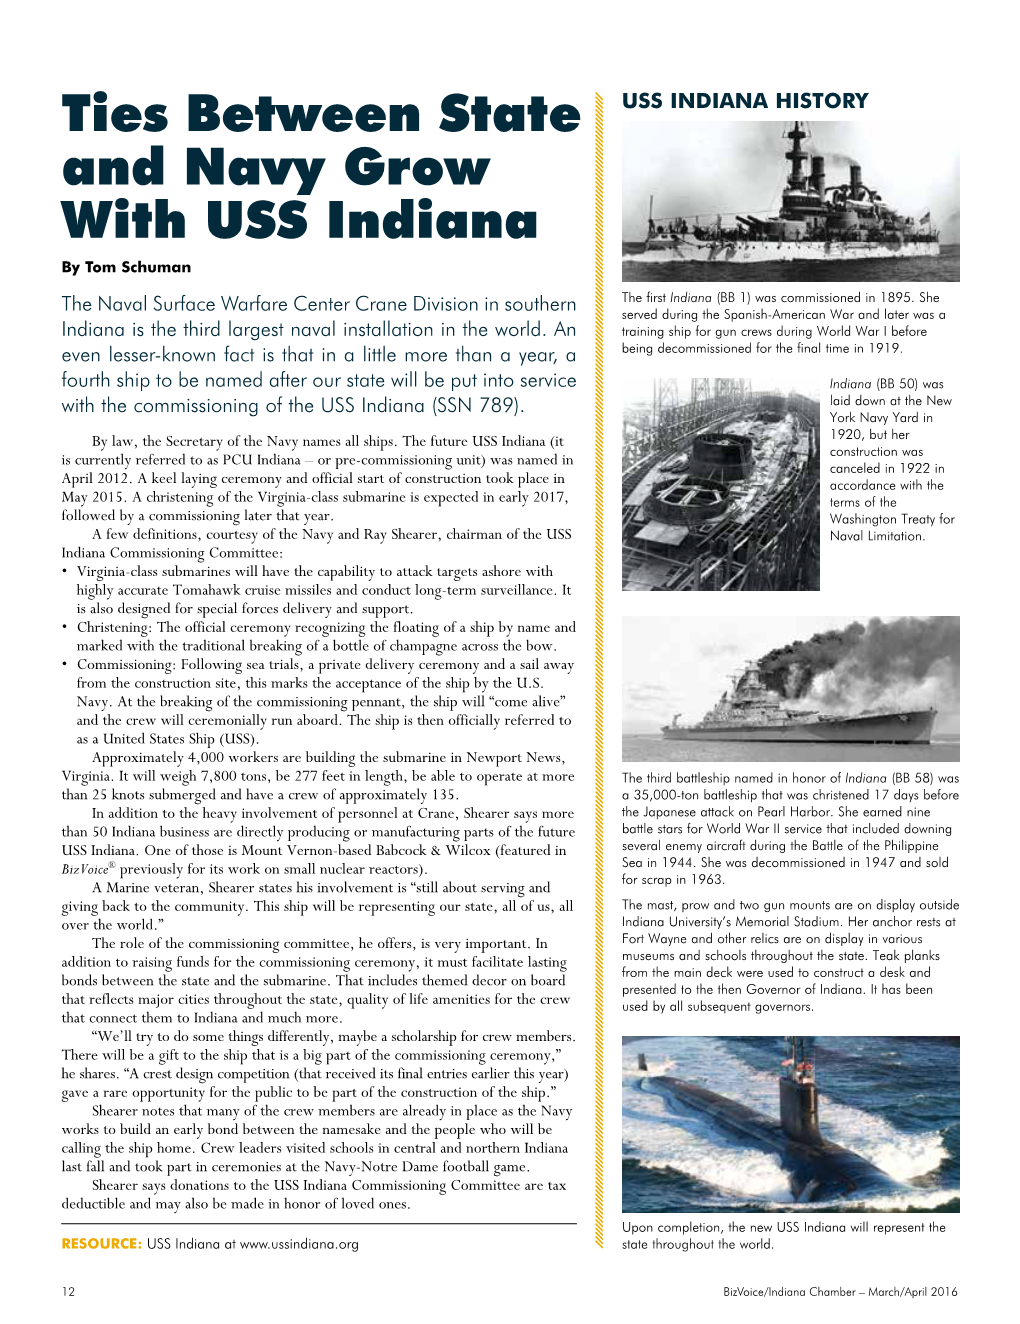 Ties Between State and Navy Grow with USS Indiana